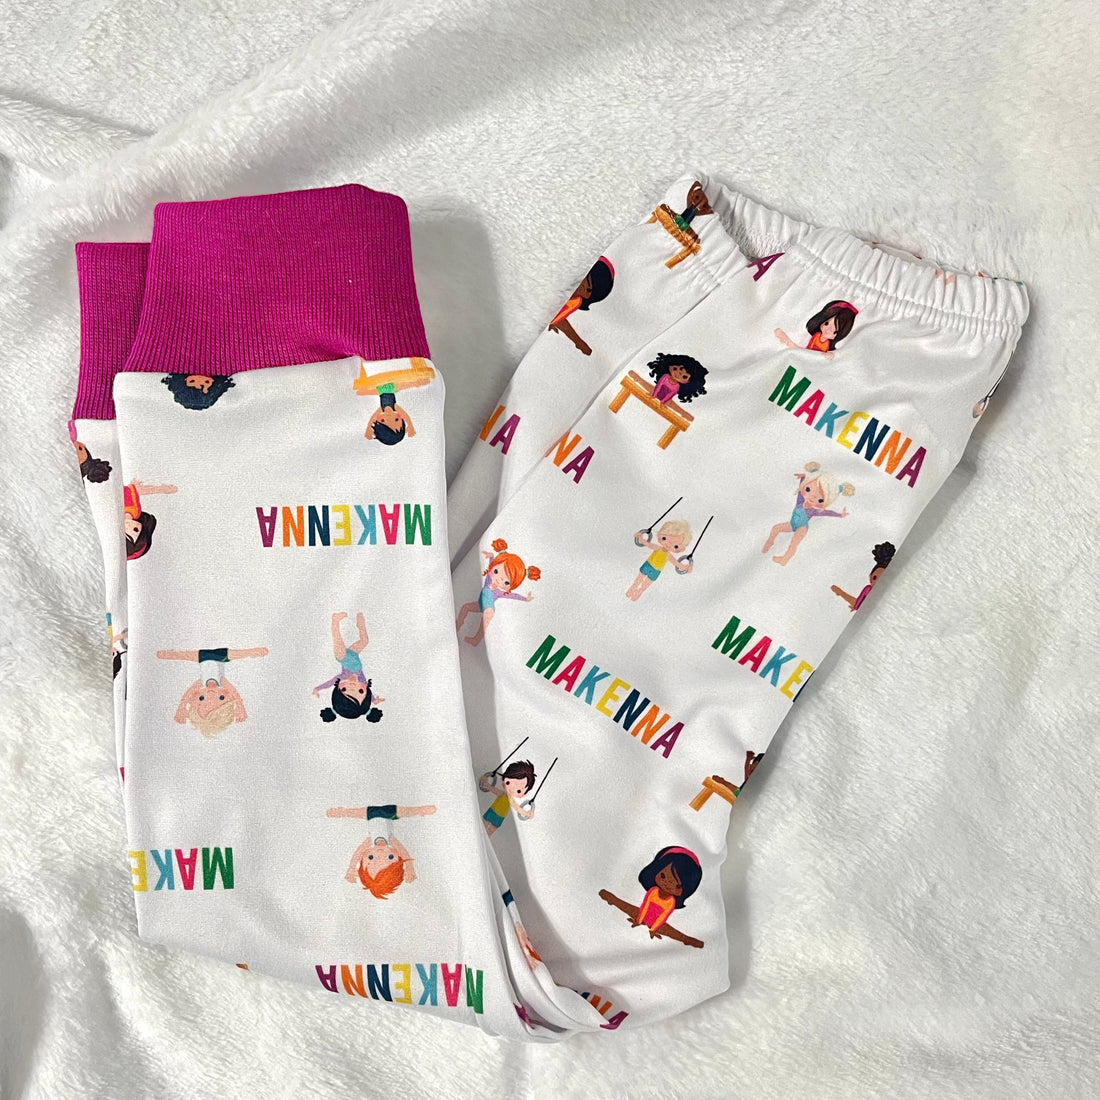 Gymnast Pajamas - Short or Long Sleeve (3 months to kids 14)